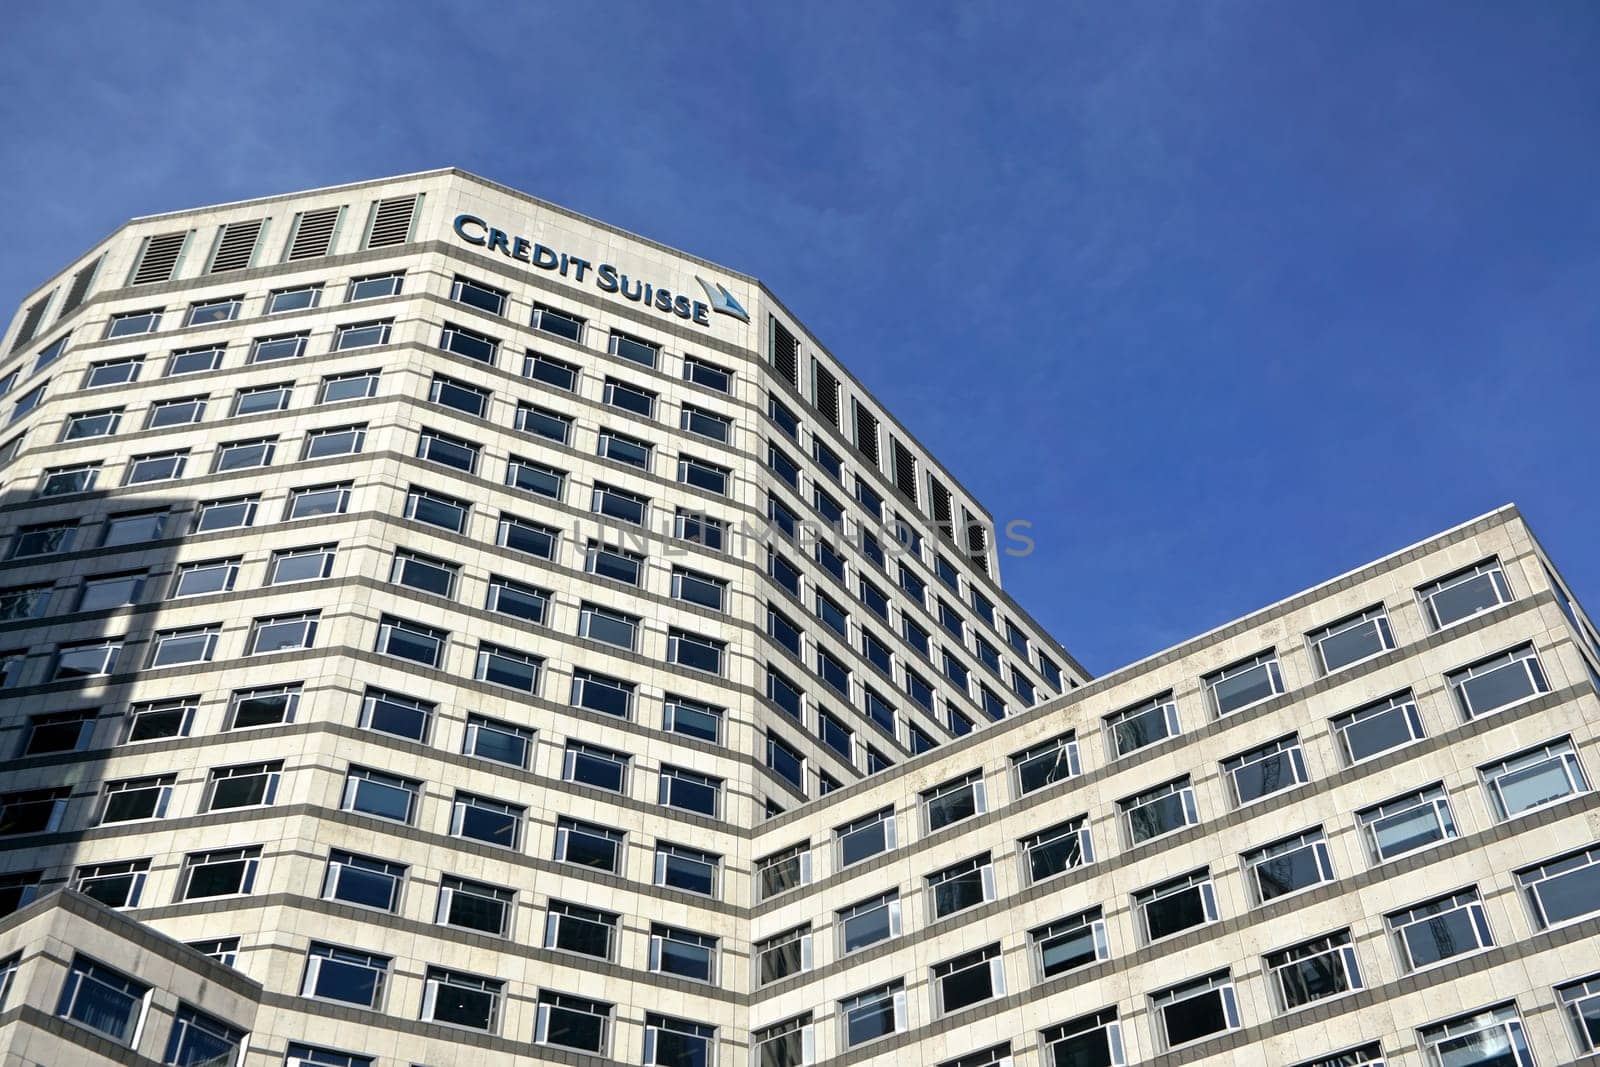 London, United Kingdom - February 03, 2019: Modern offices of UK branch of Credit Suisse at Canary Wharf. CS Group AG is multinational investment bank founded in 1856 by Ivanko